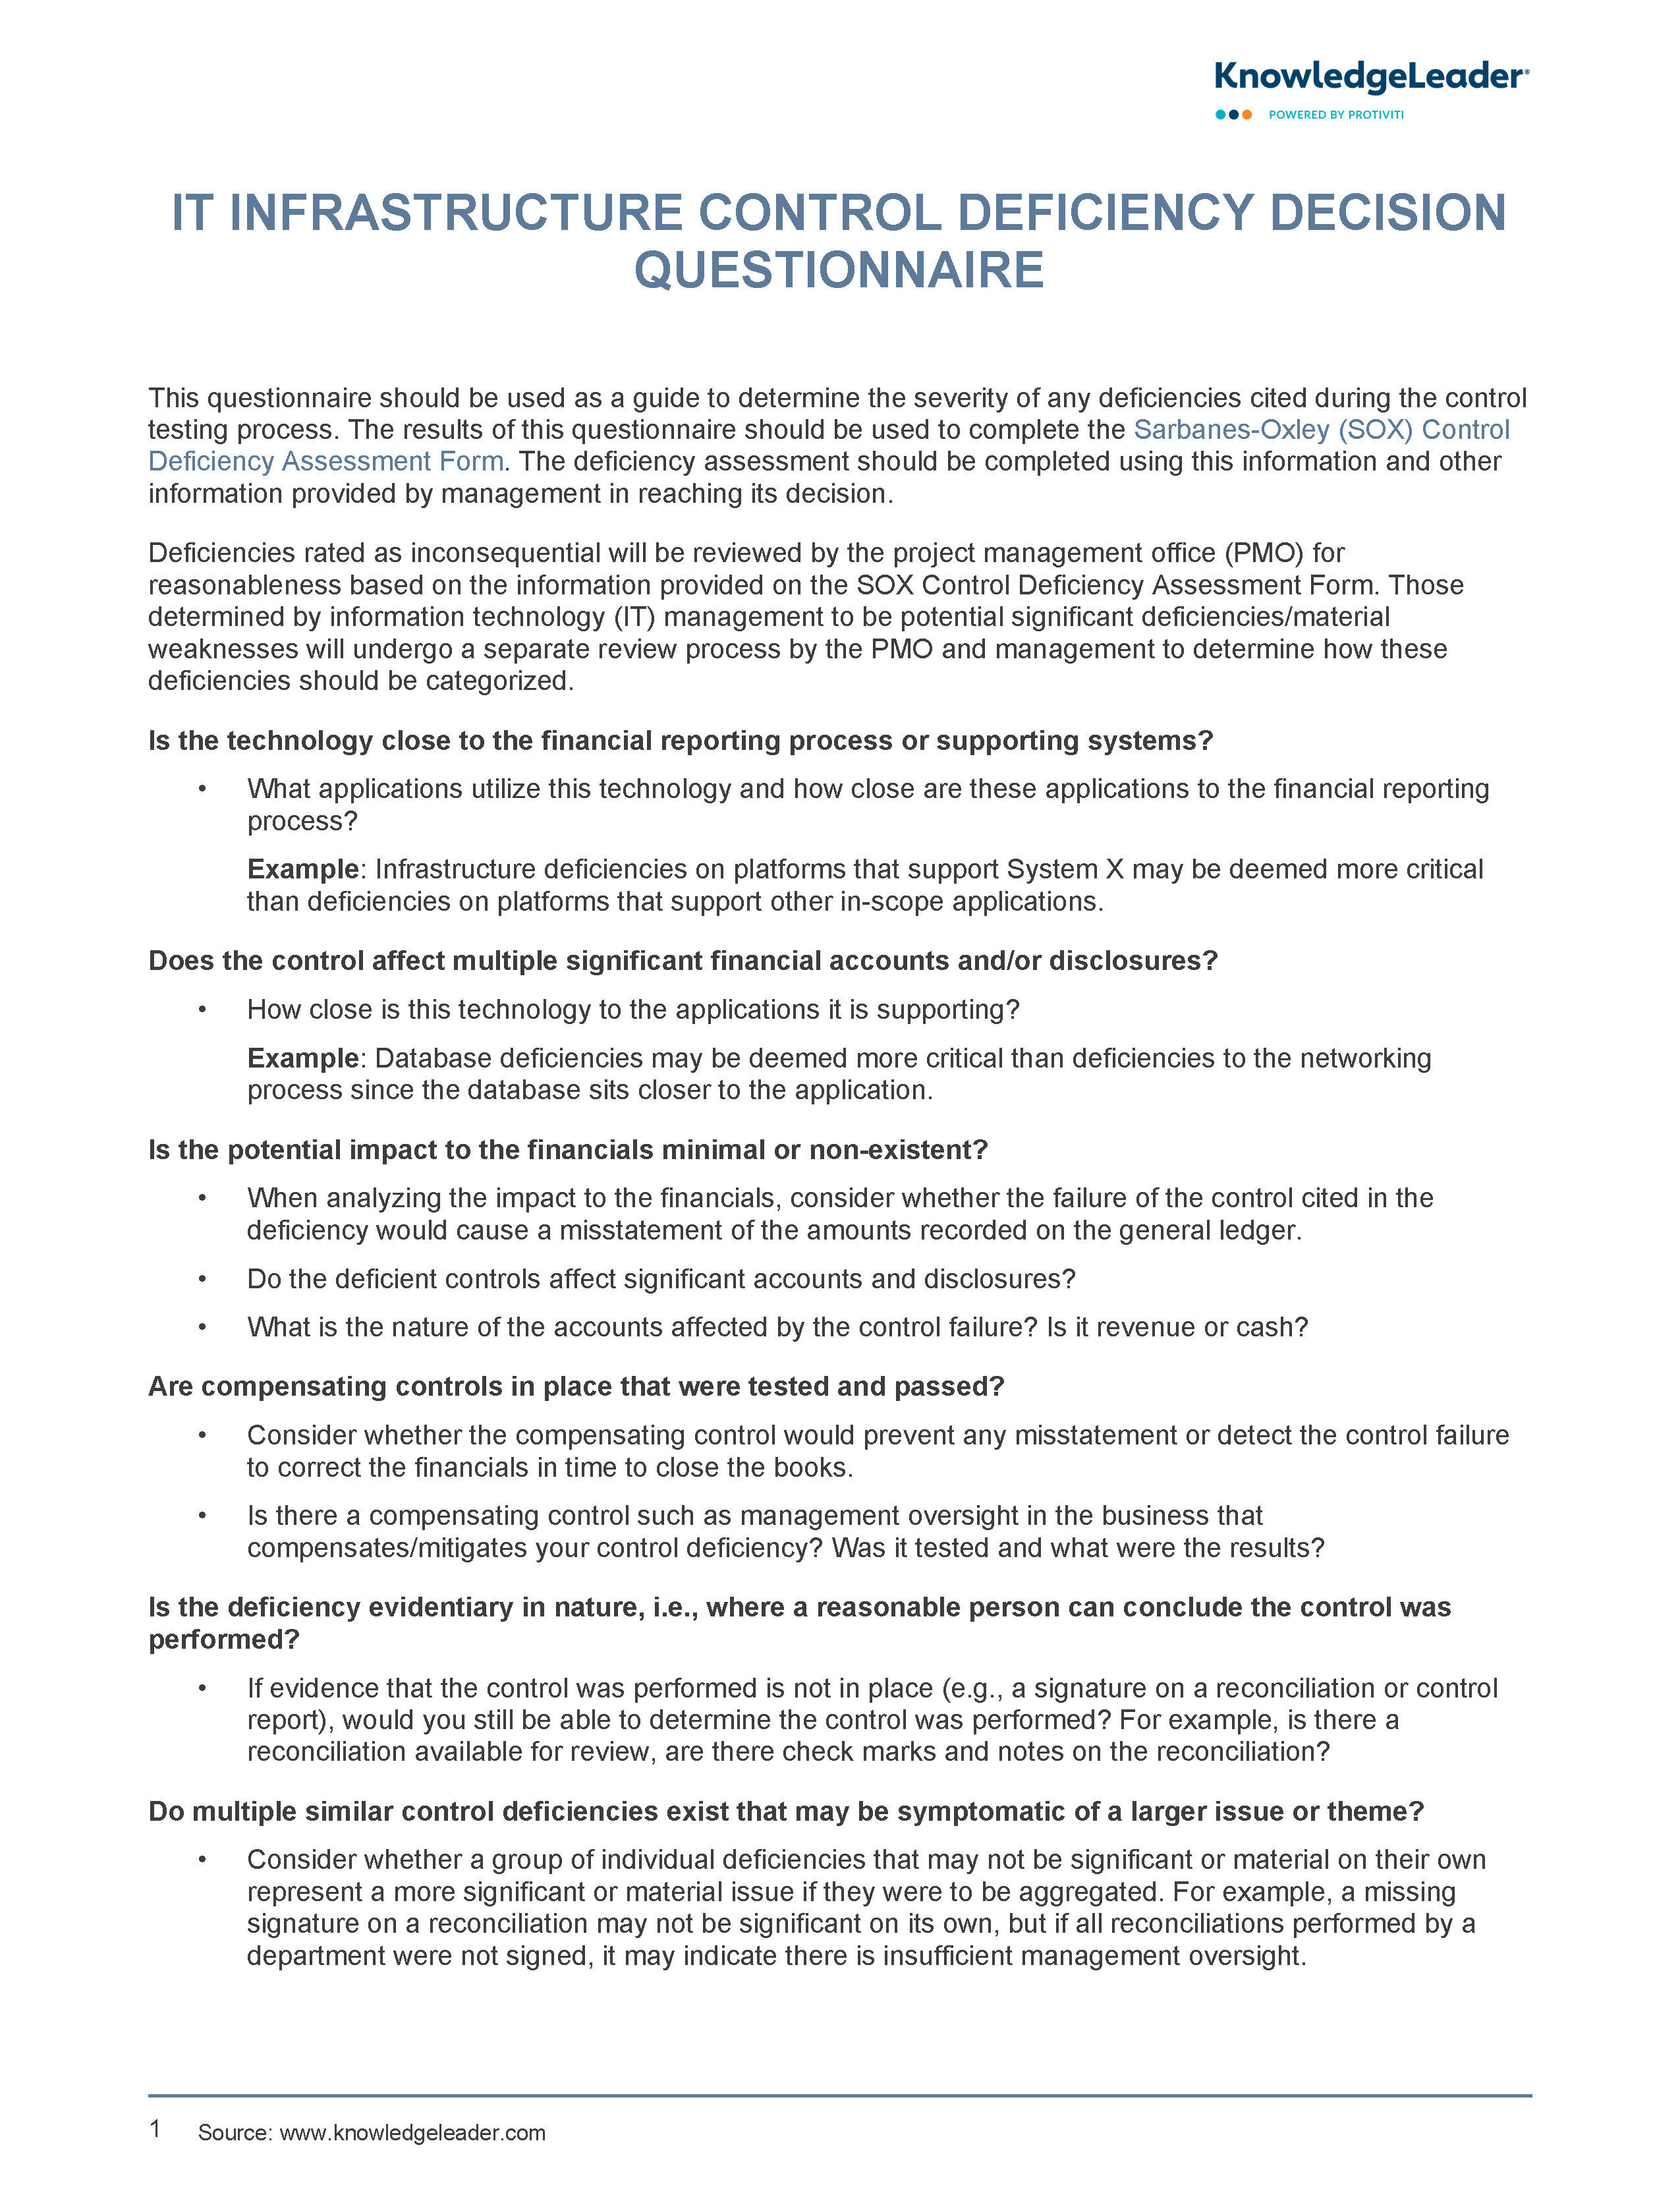 Screenshot of the first page of IT Infrastructure Control Deficiency Decision Questionnaire